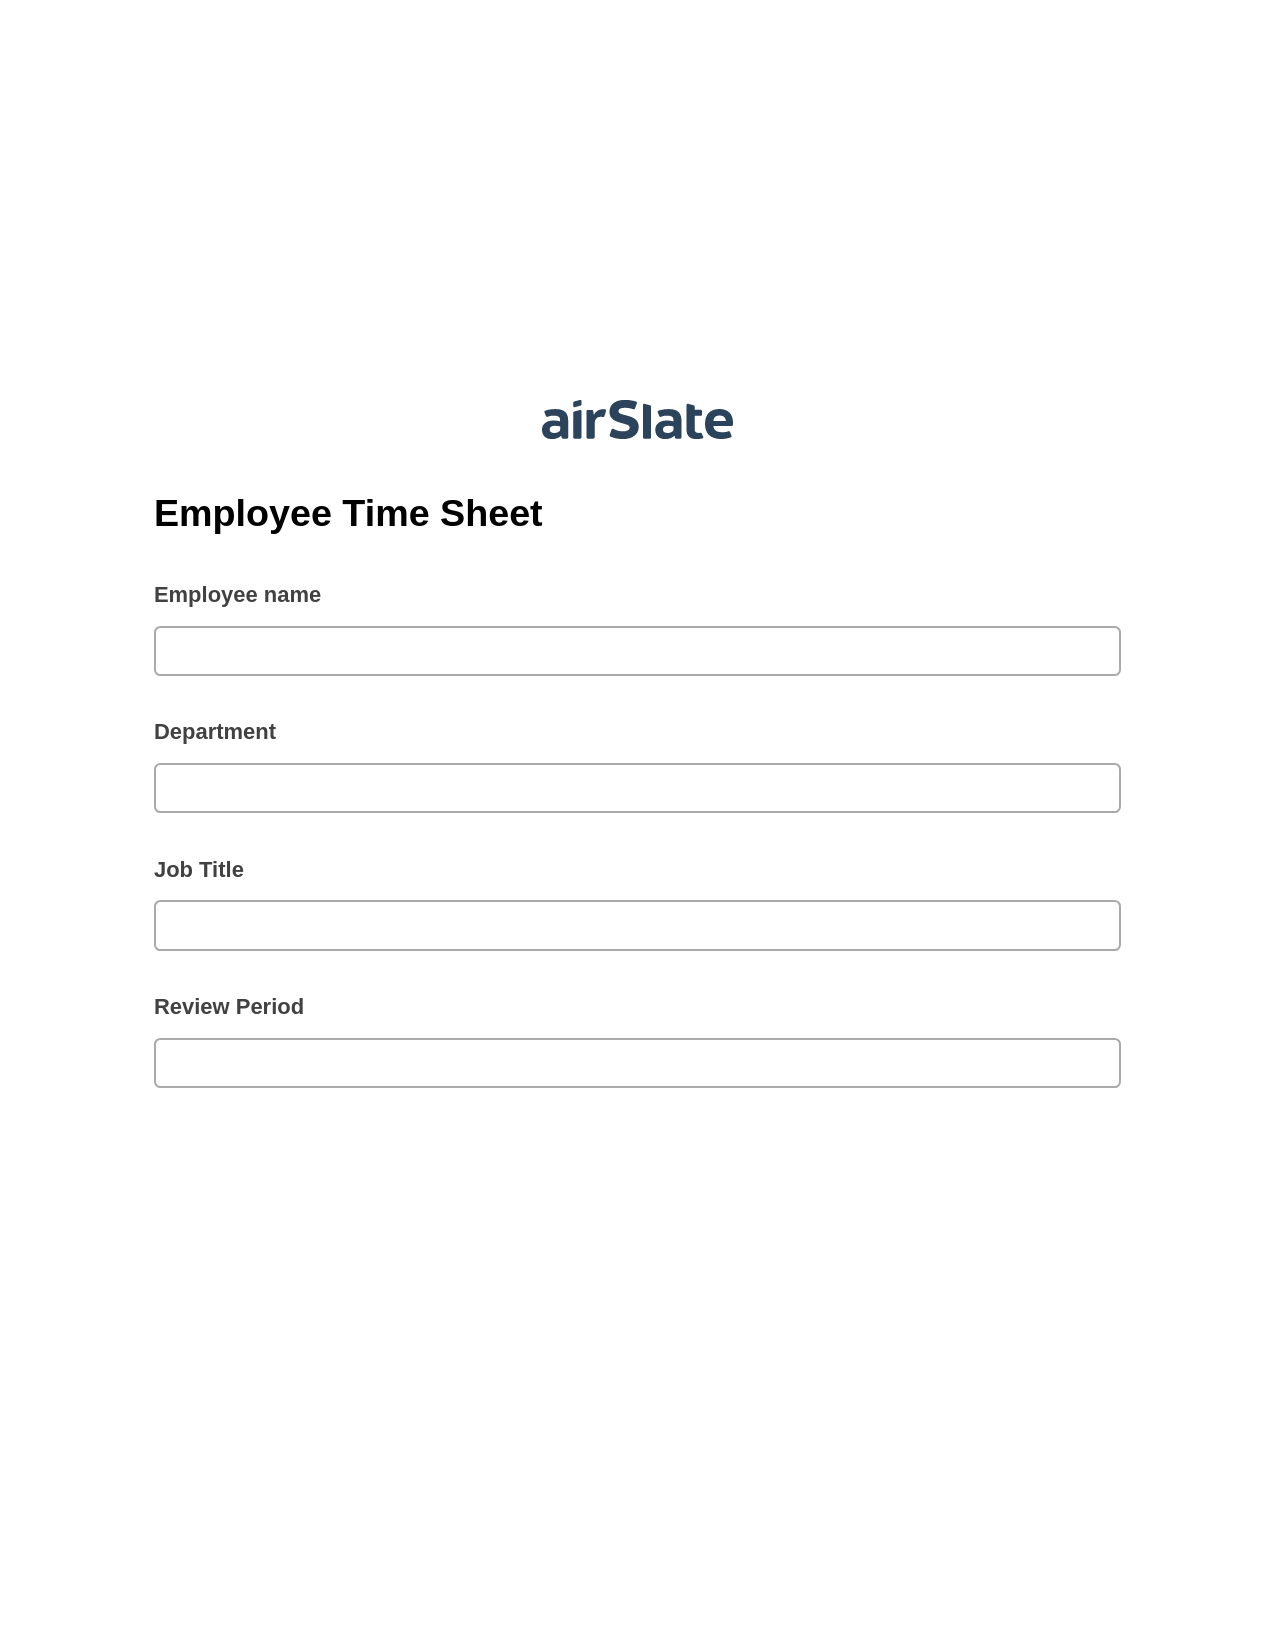 Multirole Employee Time Sheet Pre-fill from Salesforce Records Bot, Update Audit Trail Bot, Text Message Notification Postfinish Bot